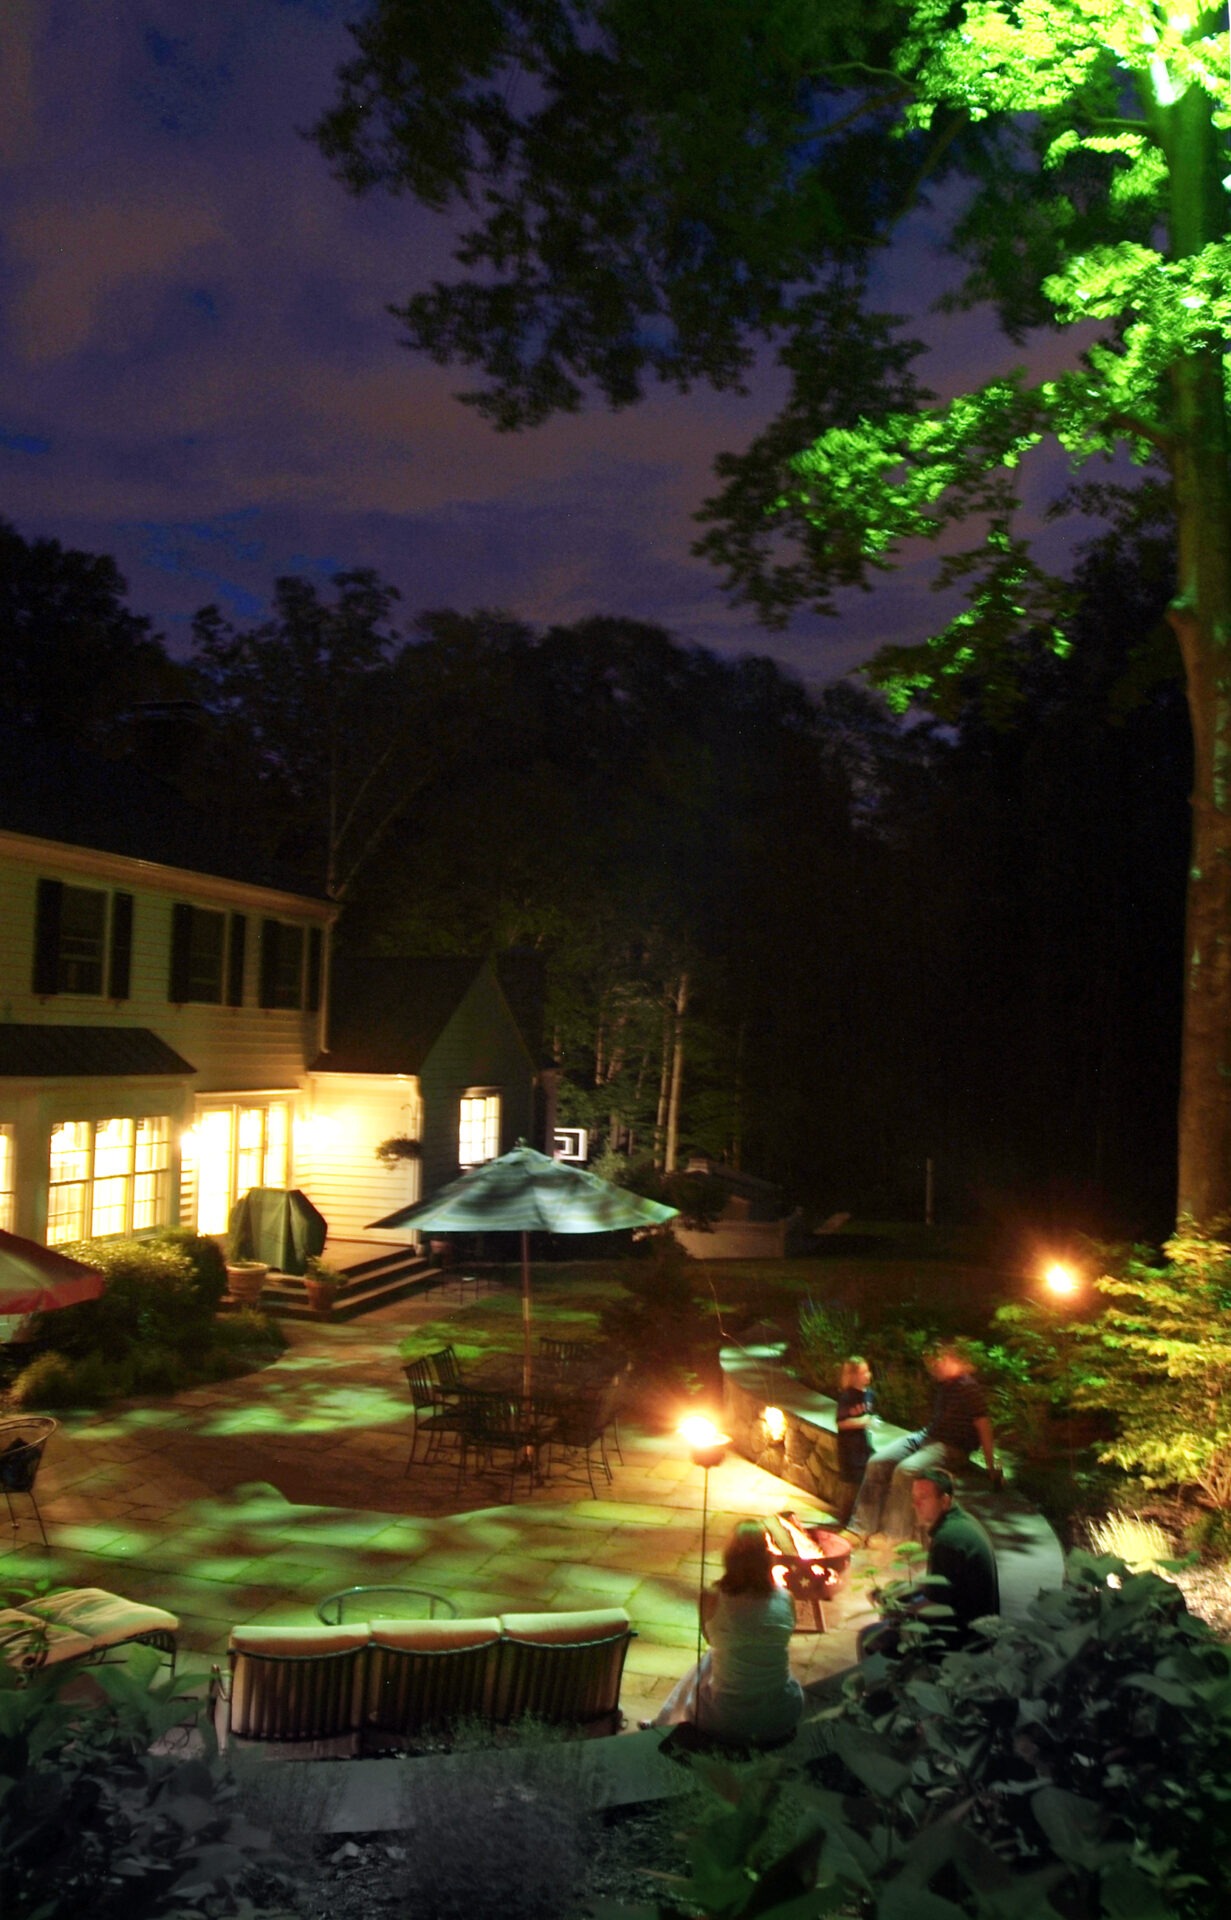 A nighttime scene in a backyard with illuminated house windows, patio furniture, a pool, and a group of people enjoying a fire pit.